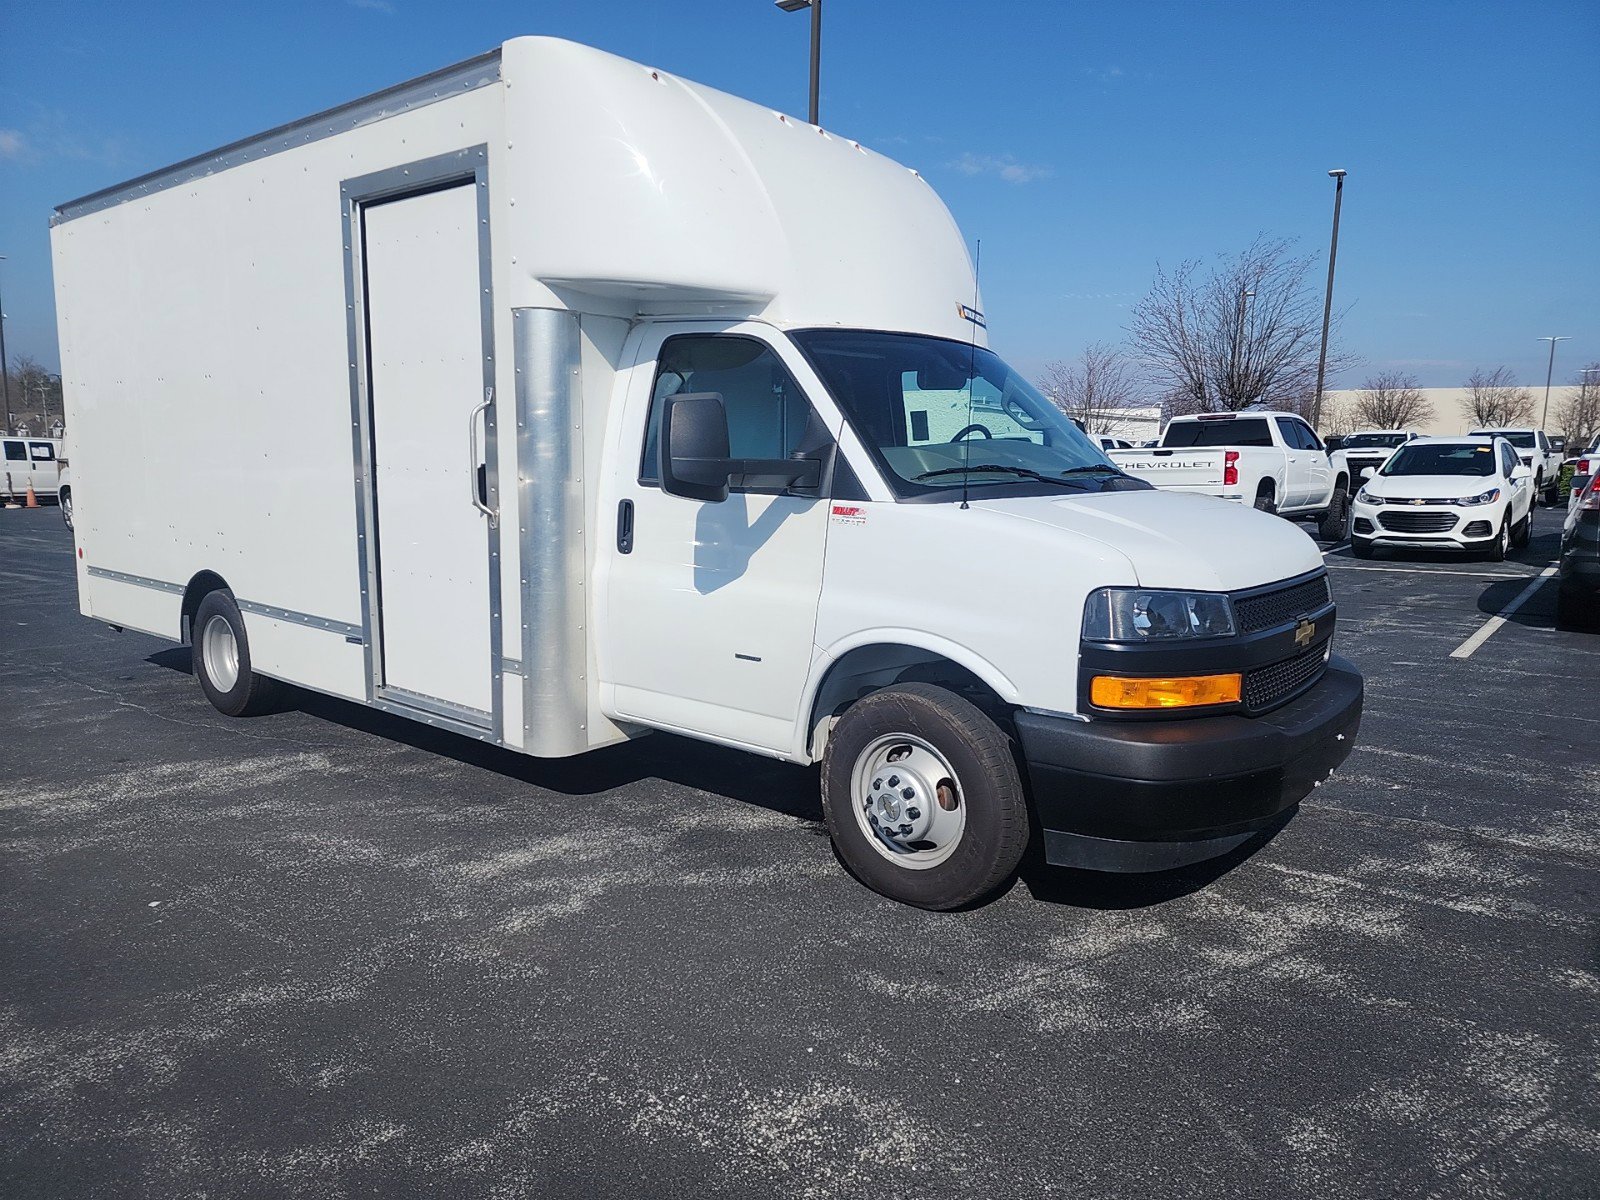 Certified Pre-Owned 2021 Chevrolet Express Cutaway 3500 RWD 3500 177 Long  Wheelbase in Cary #P6753 | Hendrick Chevrolet Cary